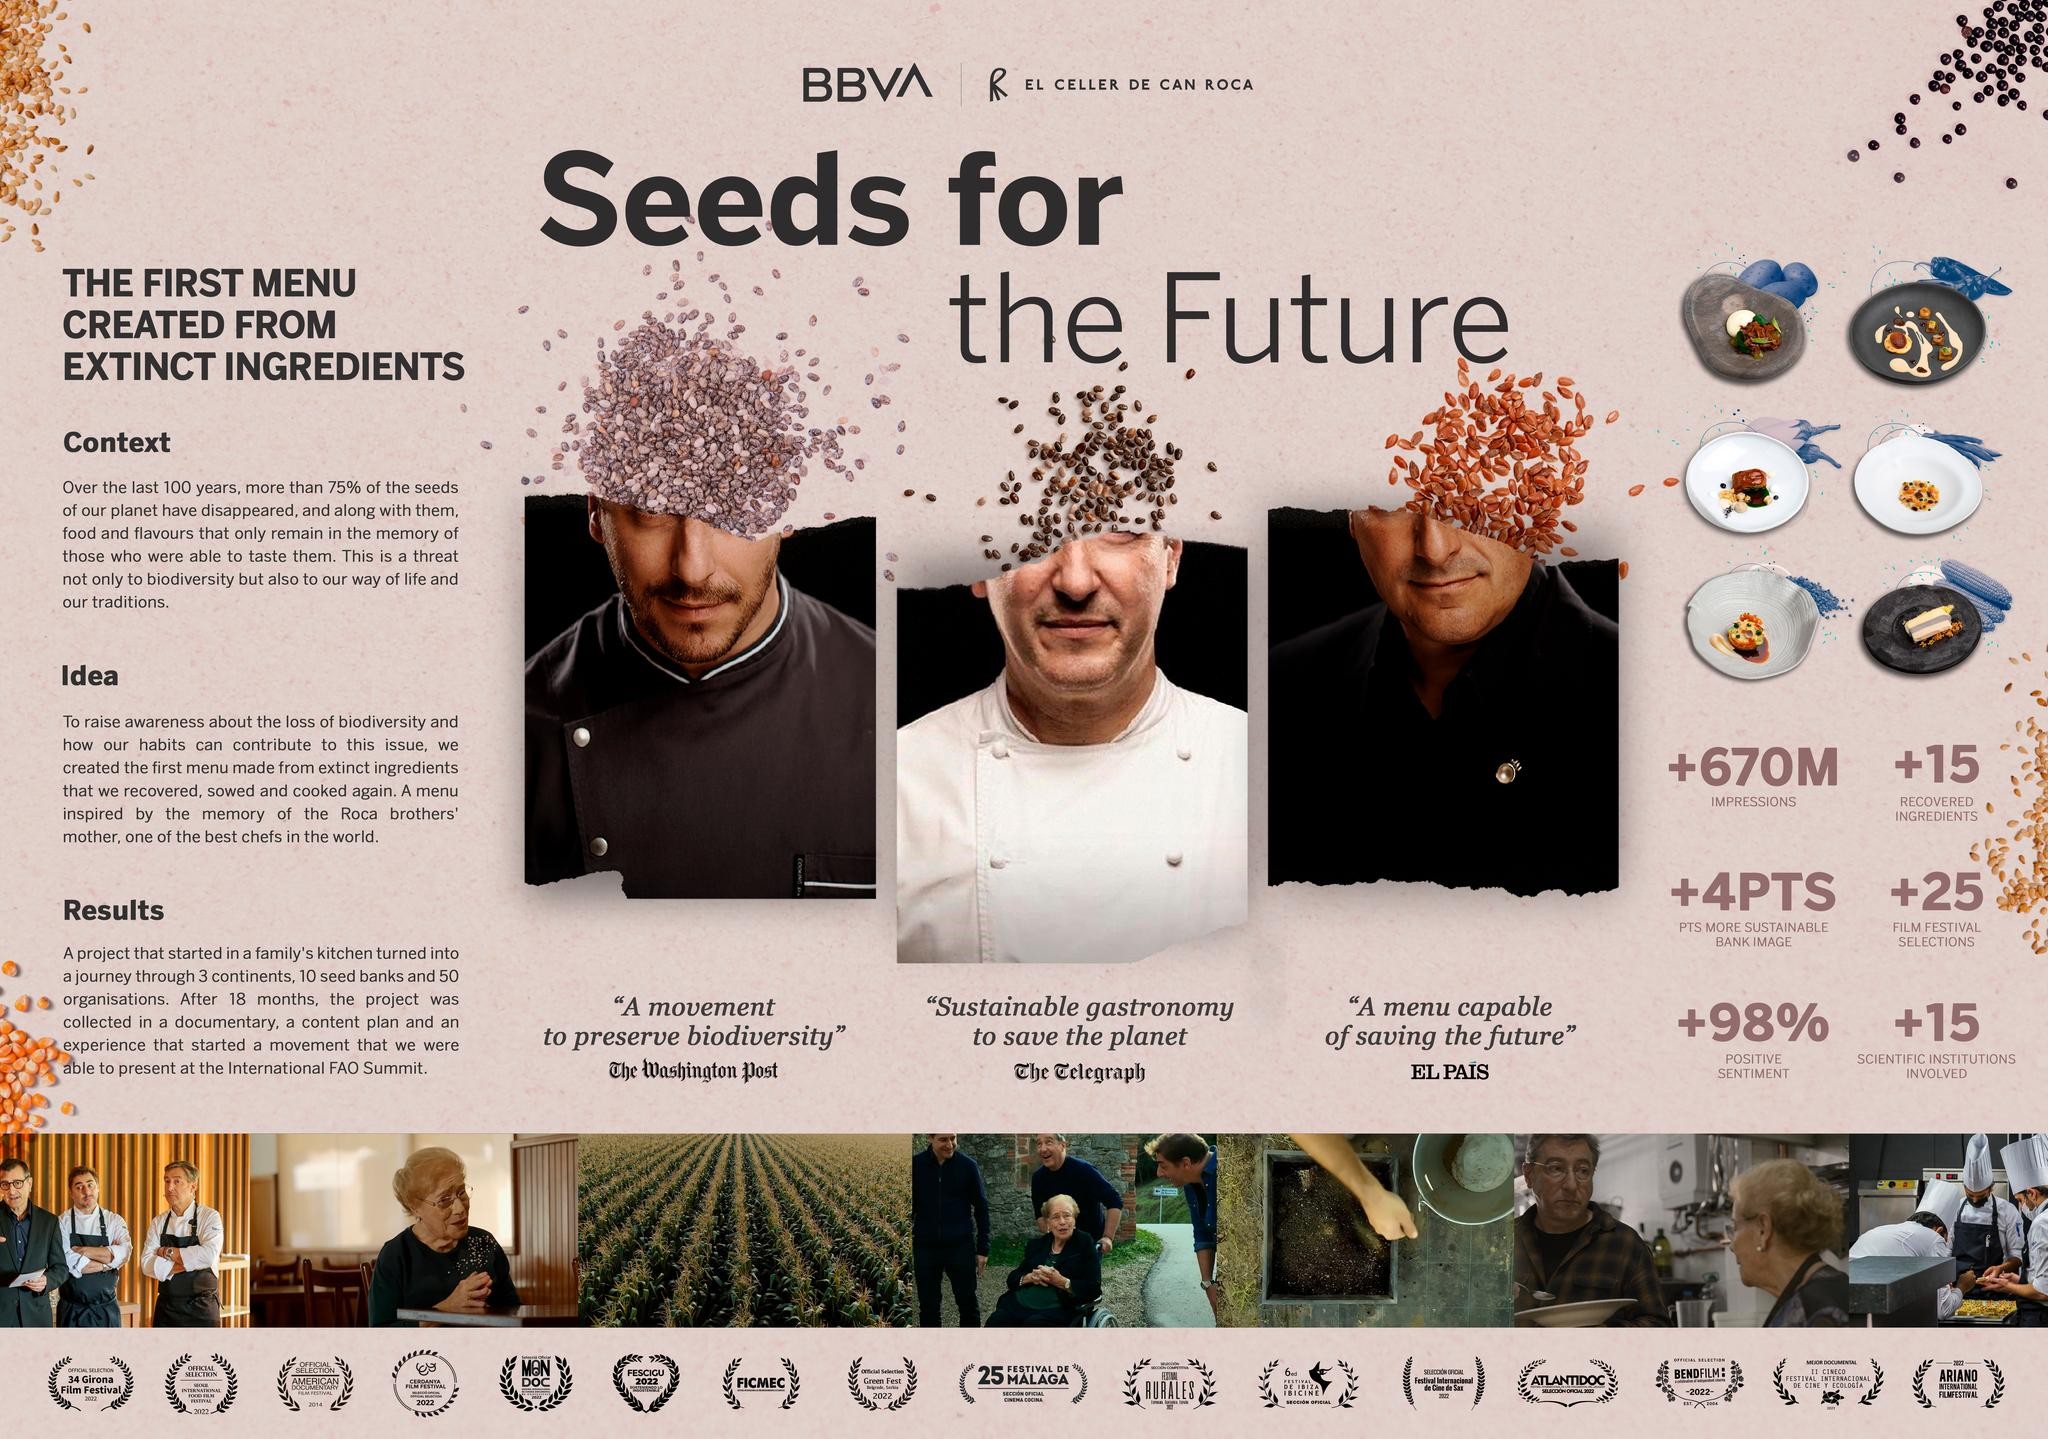 SEED FOR THE FUTURE